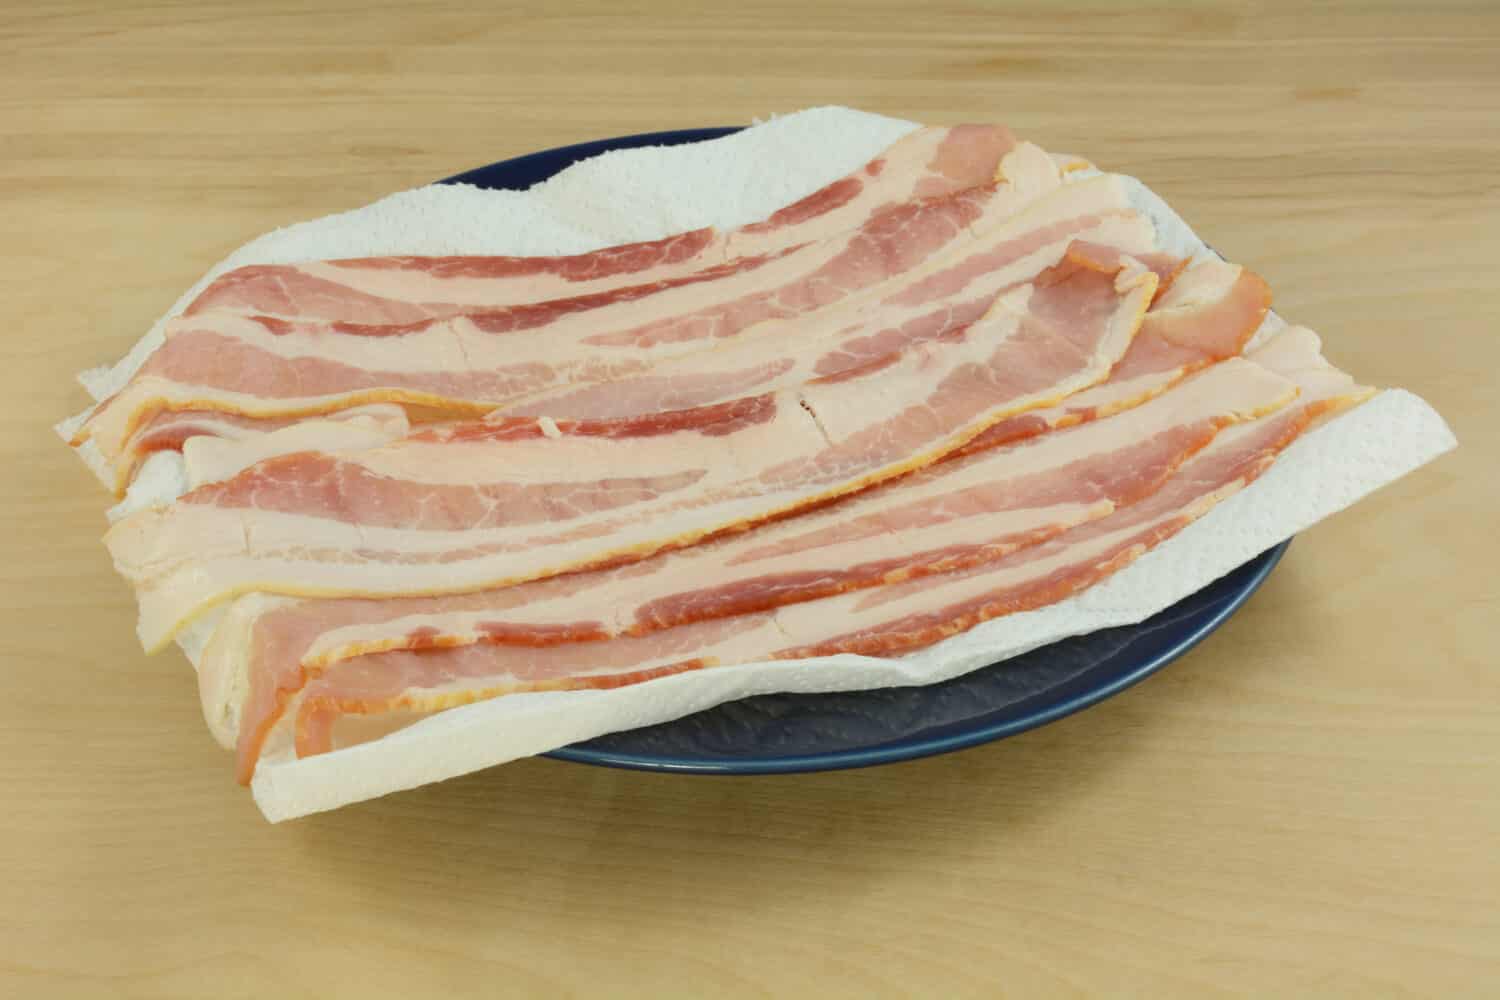 Raw bacon strips on paper towel on blue plate in preparation for microwaving